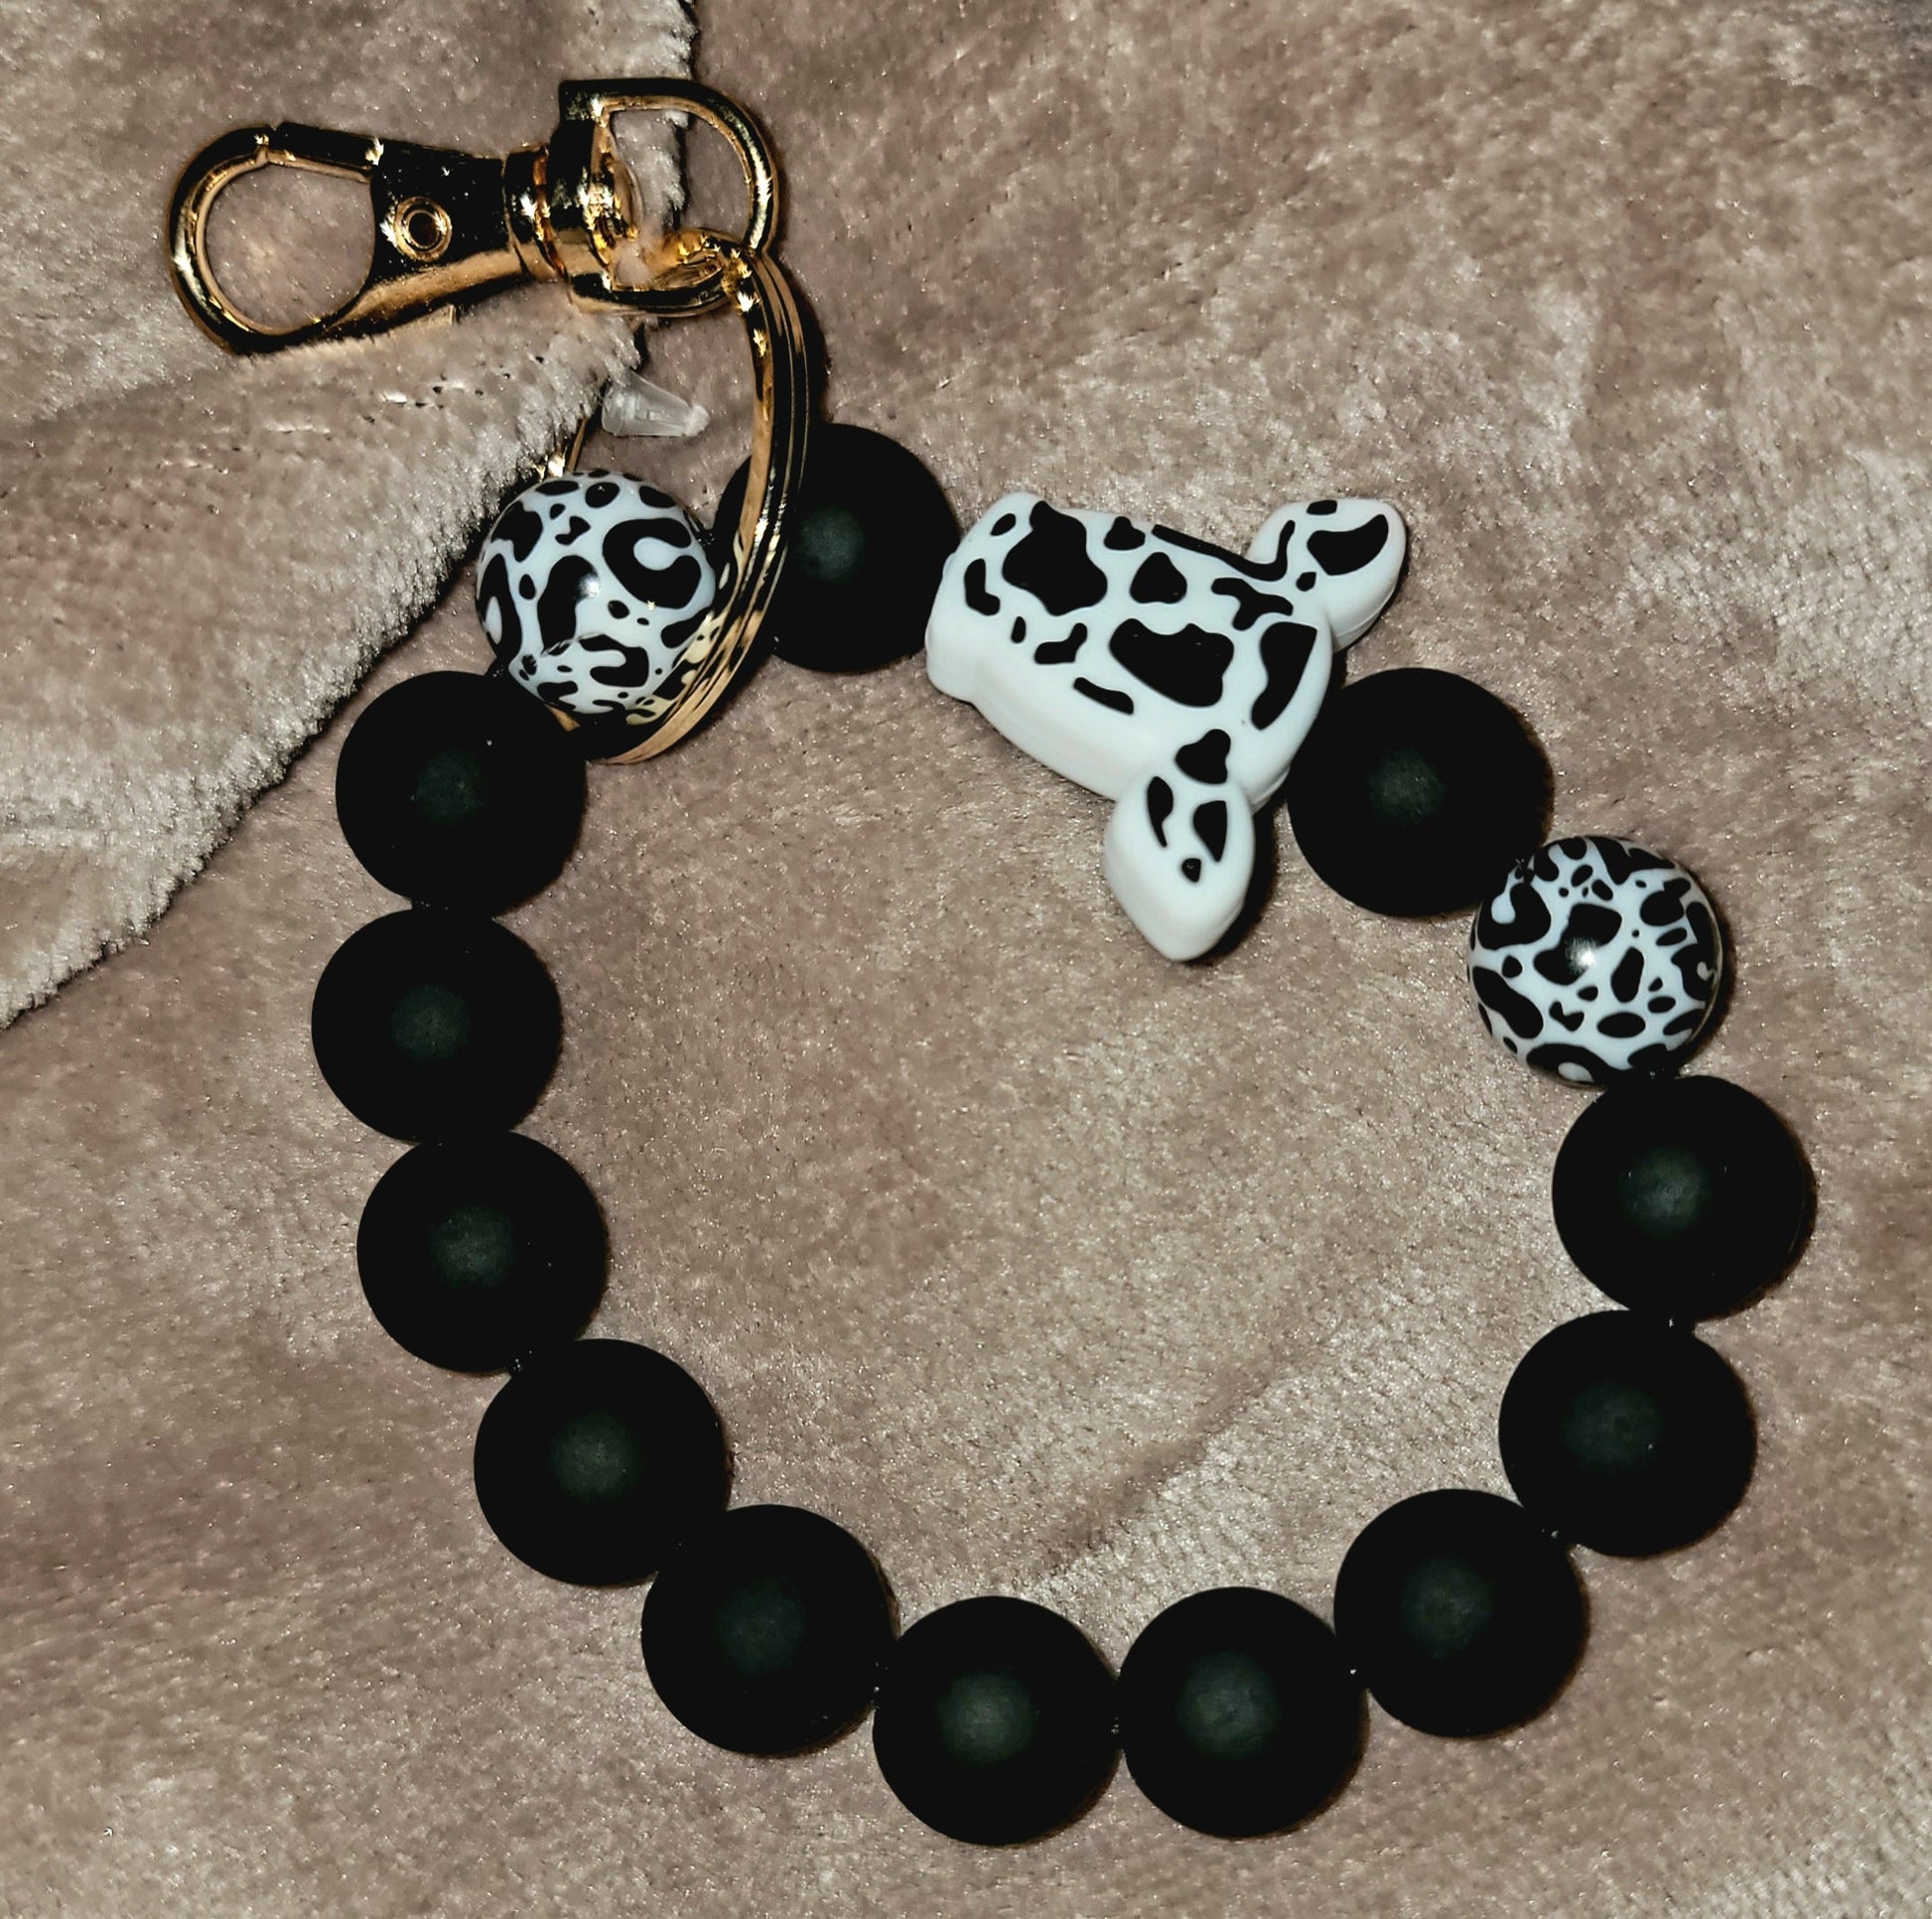 Bead Keychains Black Cow by The Rustic Redbud Boutique | The Rustic Redbud Boutique